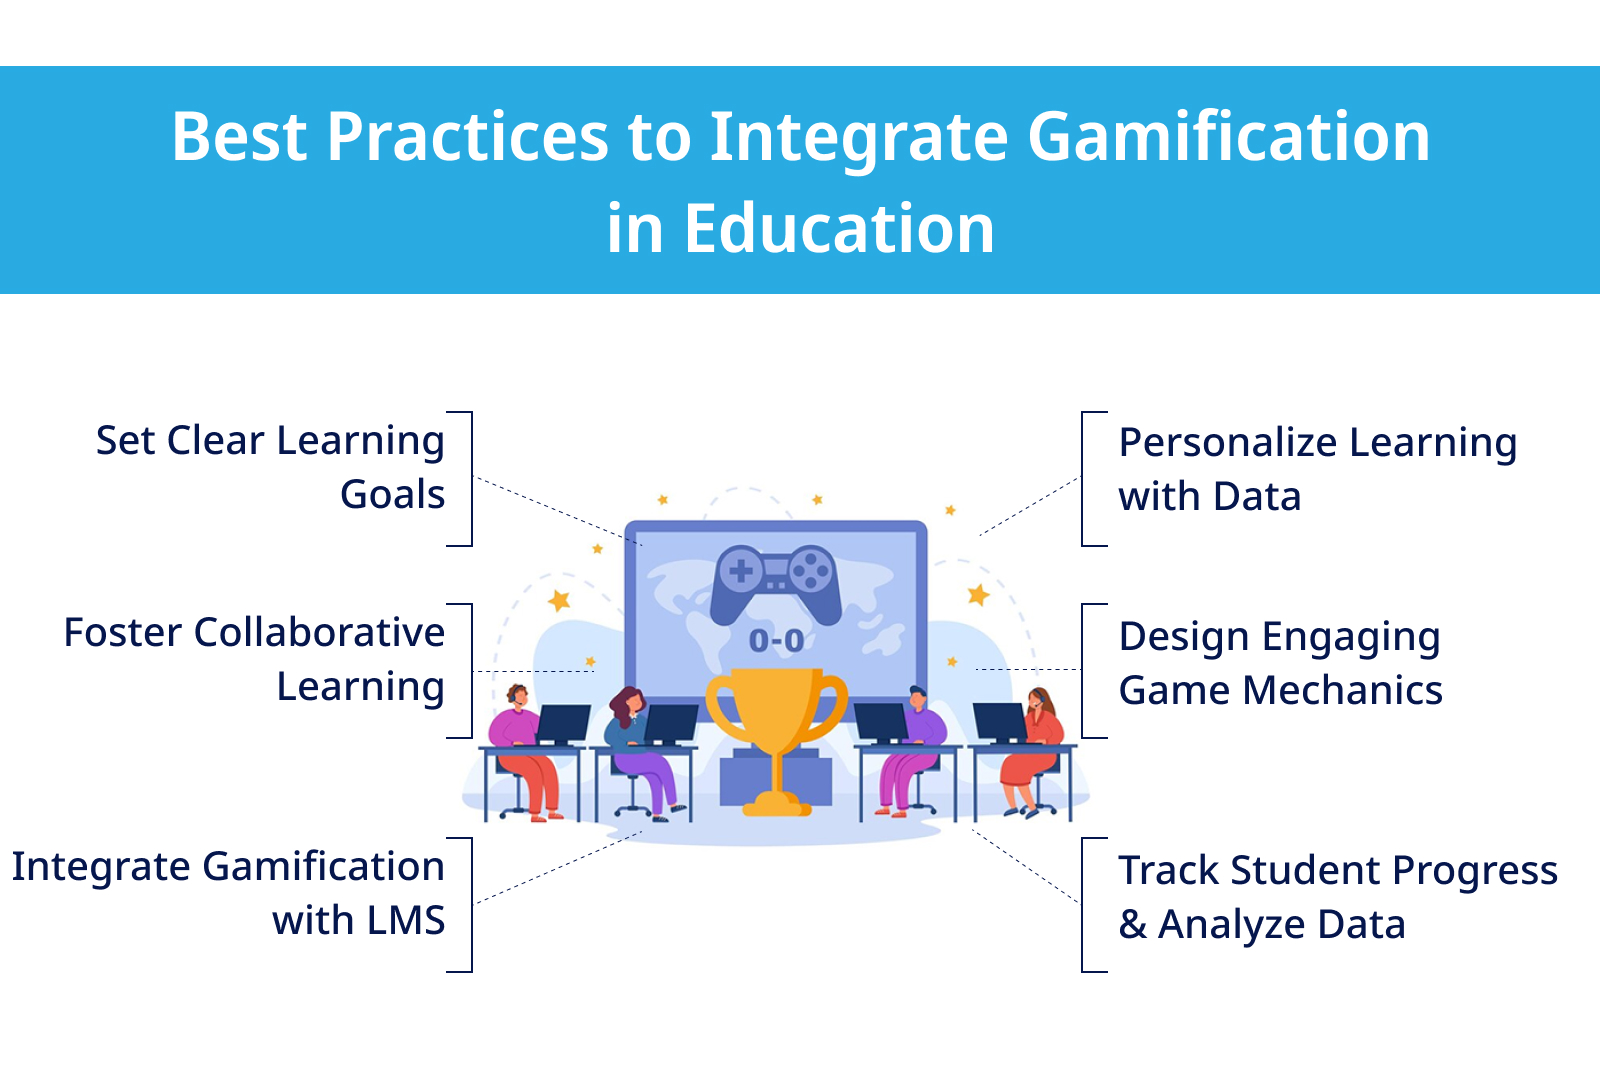 Best Practices to Integrate Gamification in Education